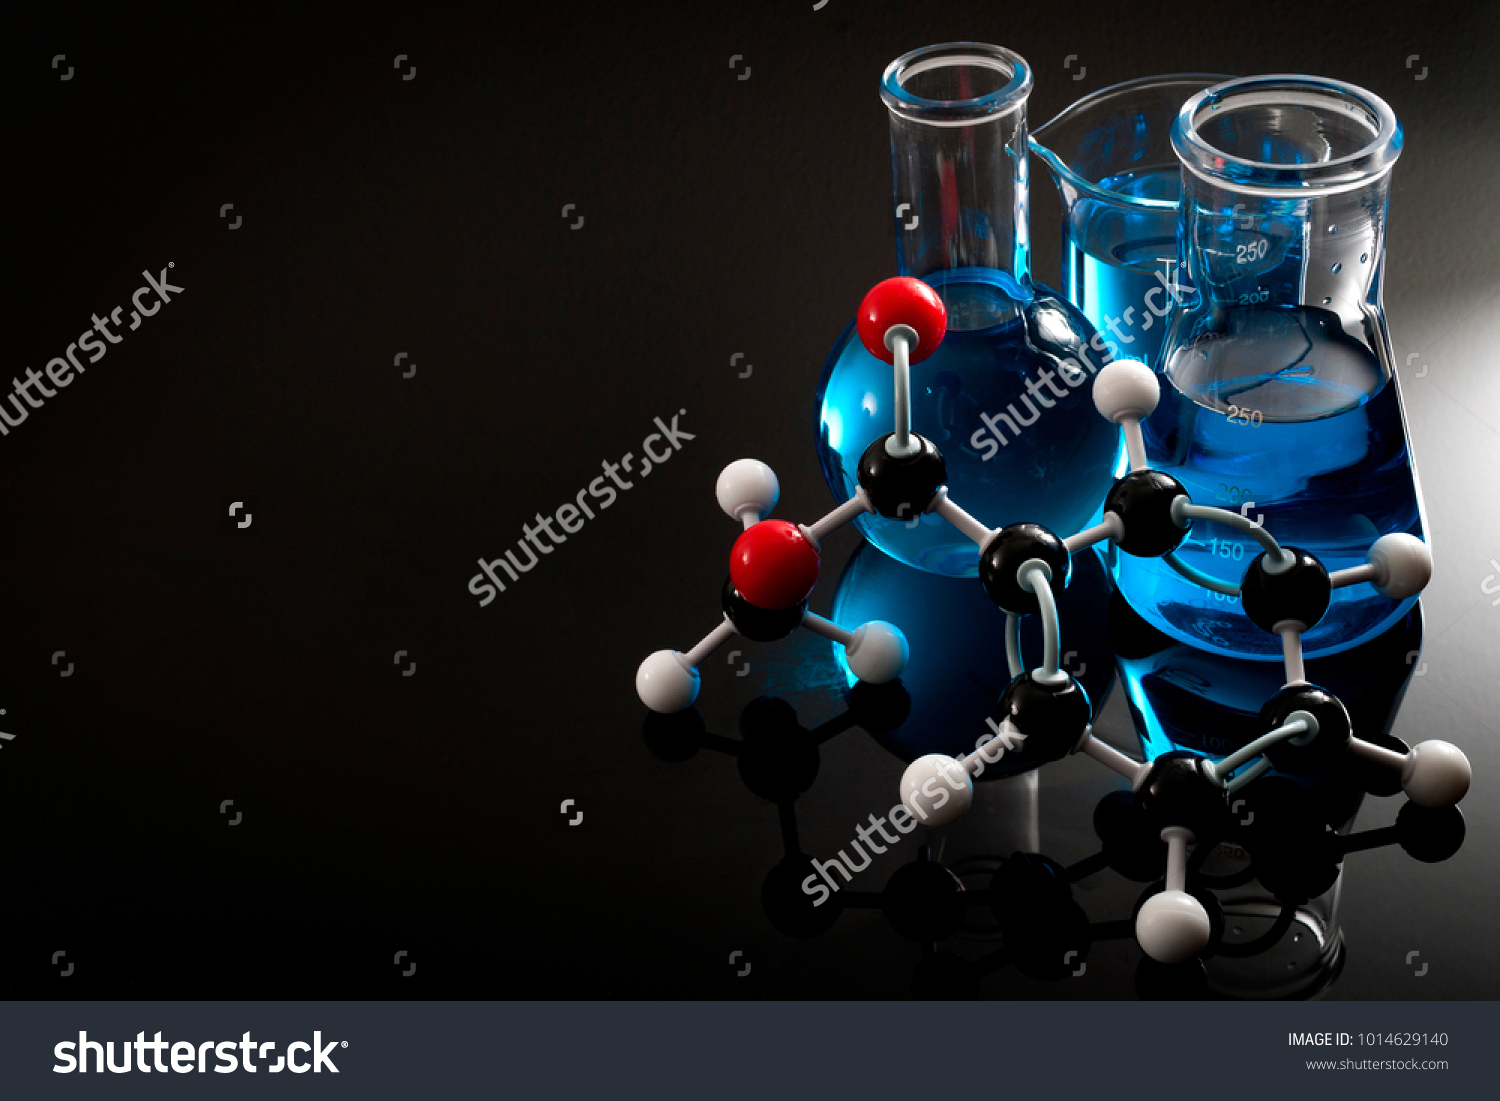 Organic chemistry, science class and STEM research concept with a methyl benzoate molecule on blue chemical solution in chemistry glassware, Erlenmeyer and Boiling (or Florence) flasks with copy space #1014629140